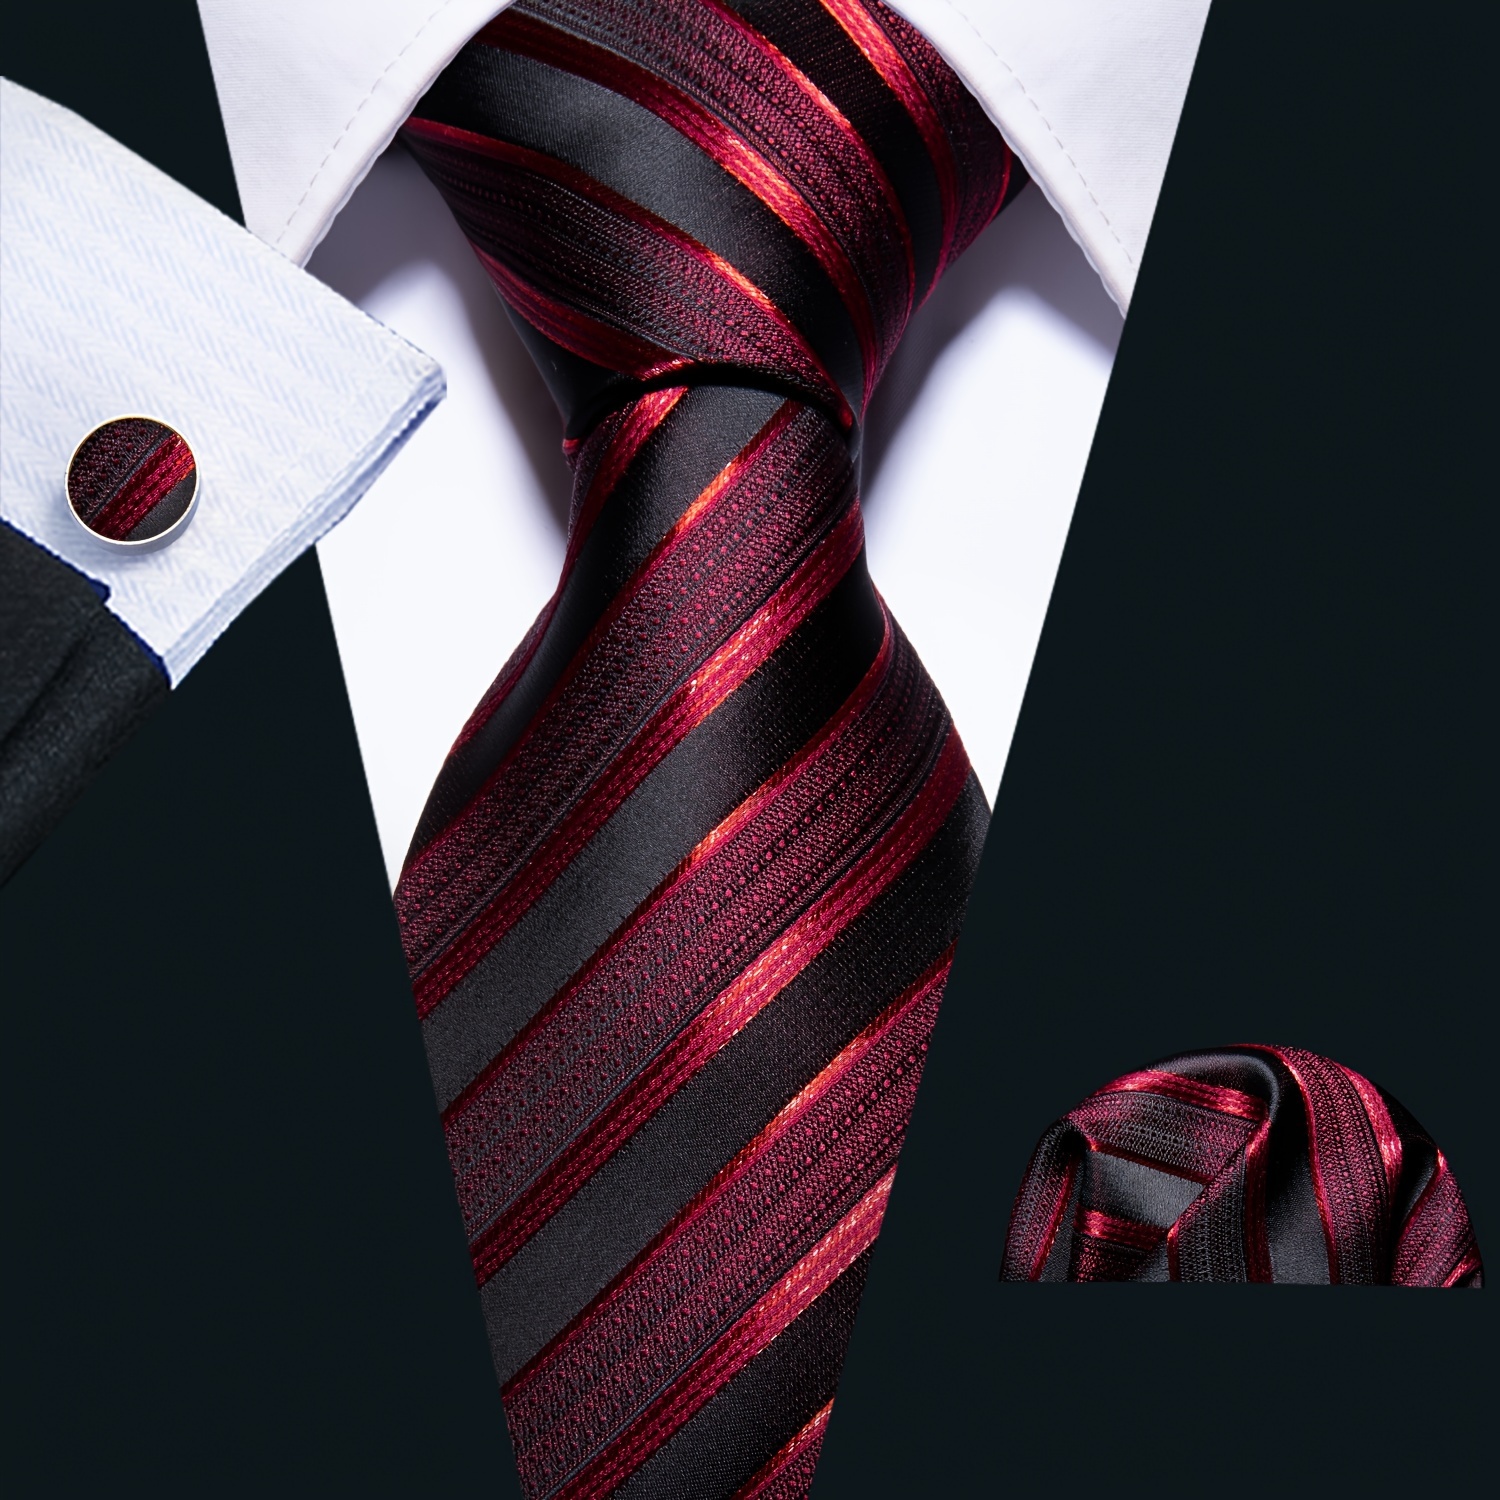 

3pcs/set Men's Silk Classic Striped Necktie With Hanky And Cufflinks For Business & Wedding, Father's Day Gift